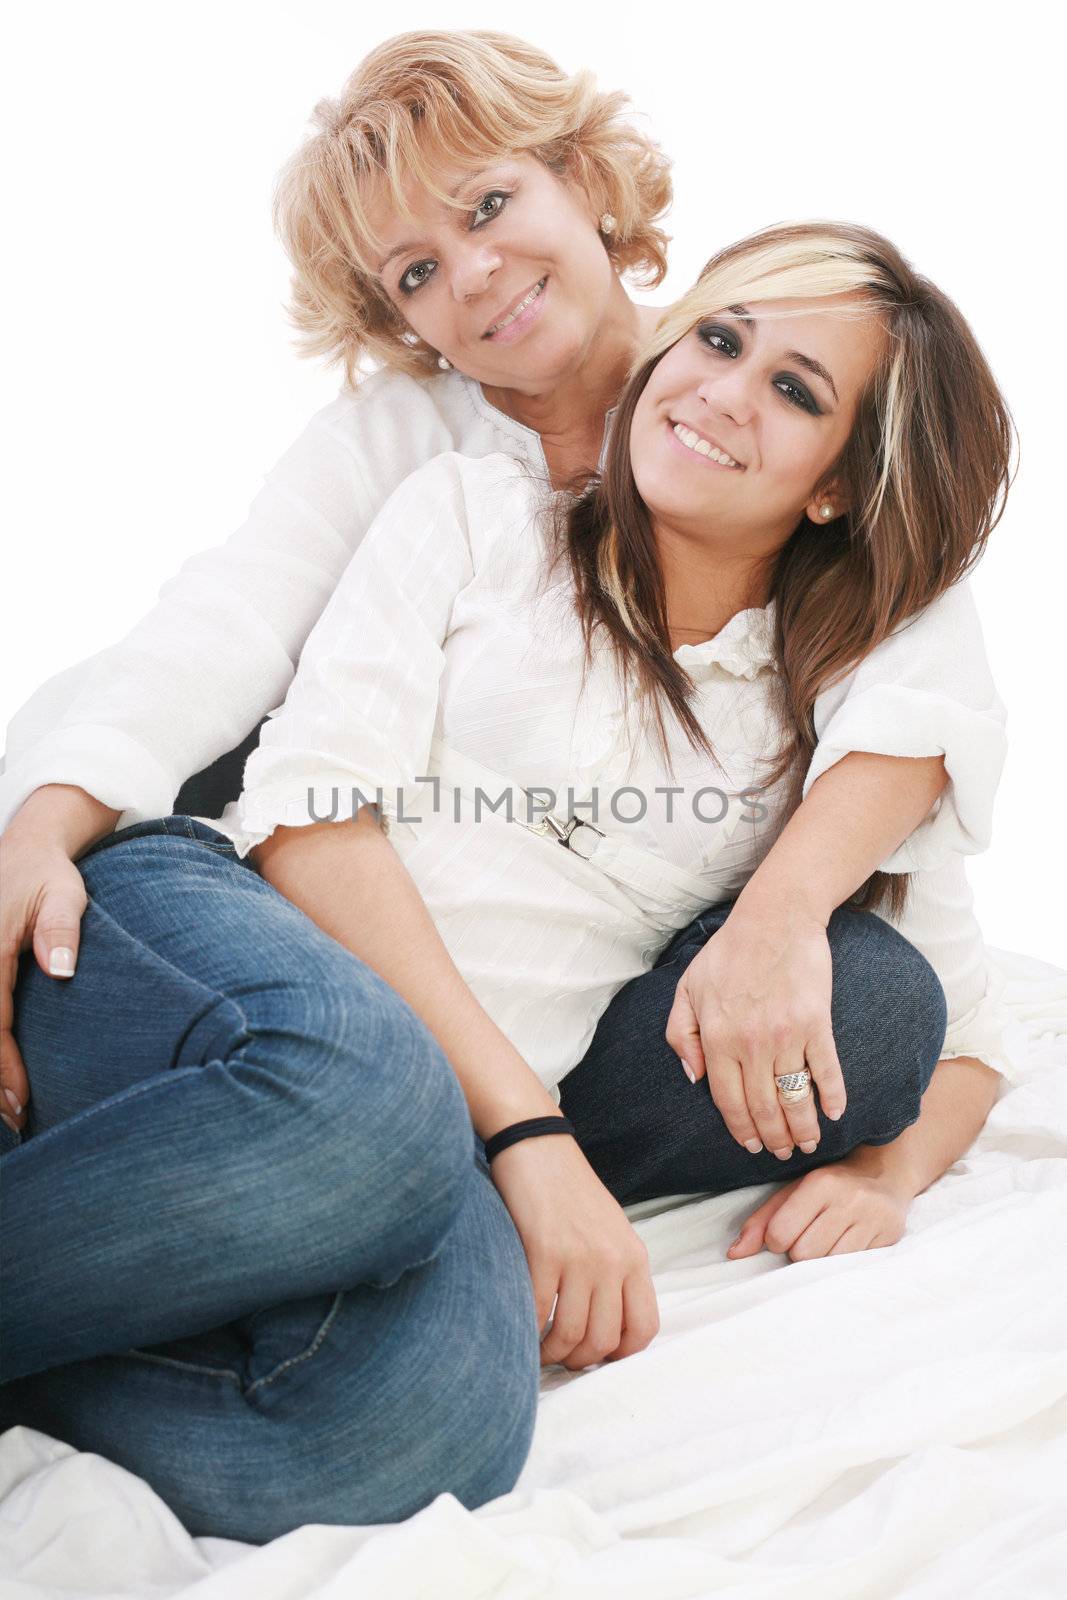 image of a mother and daughter happily together sitting on the f by dacasdo